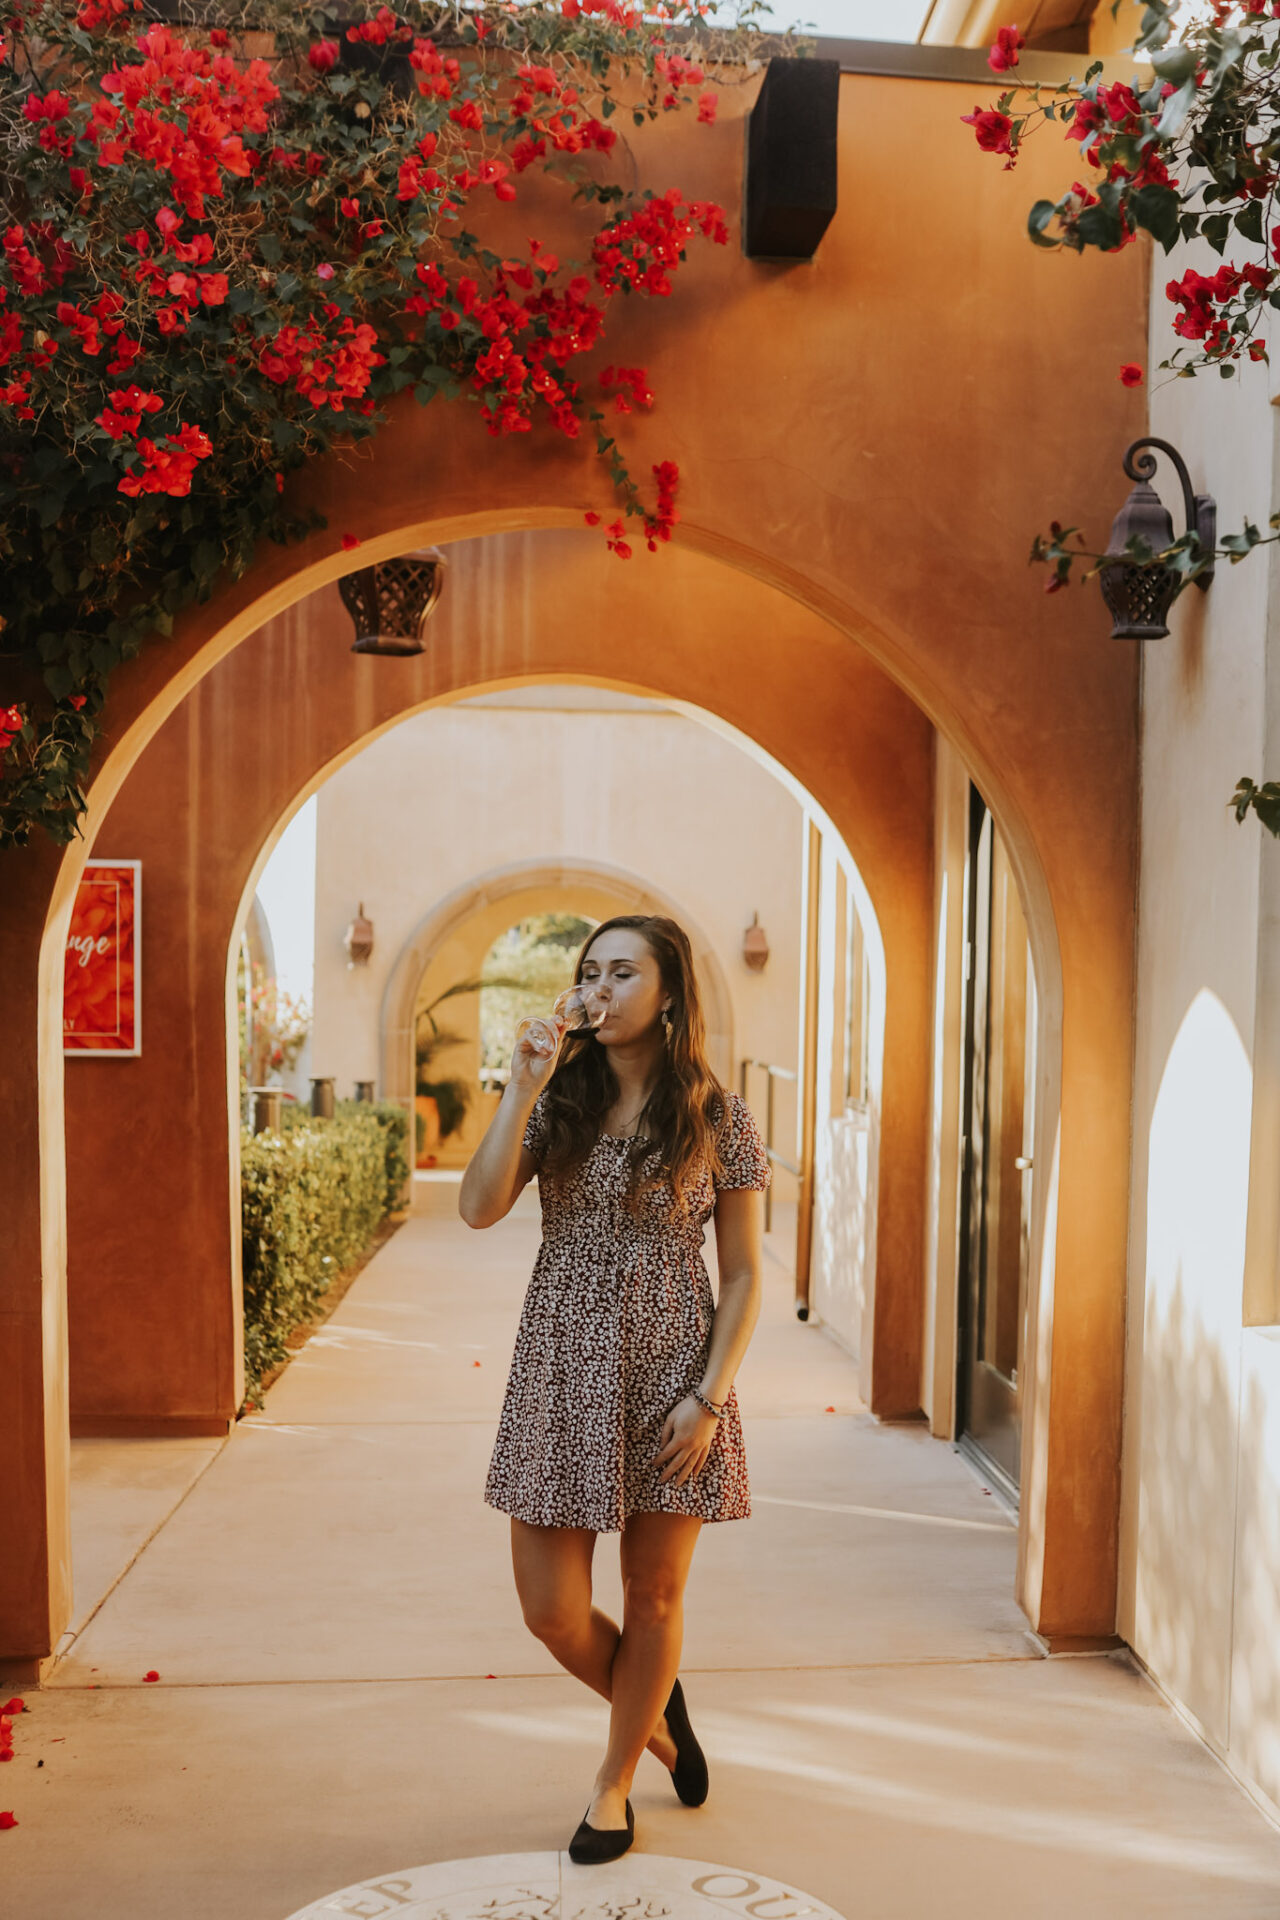 Paige at Fazeli Winery in Temecula, surrounded by pink flowers